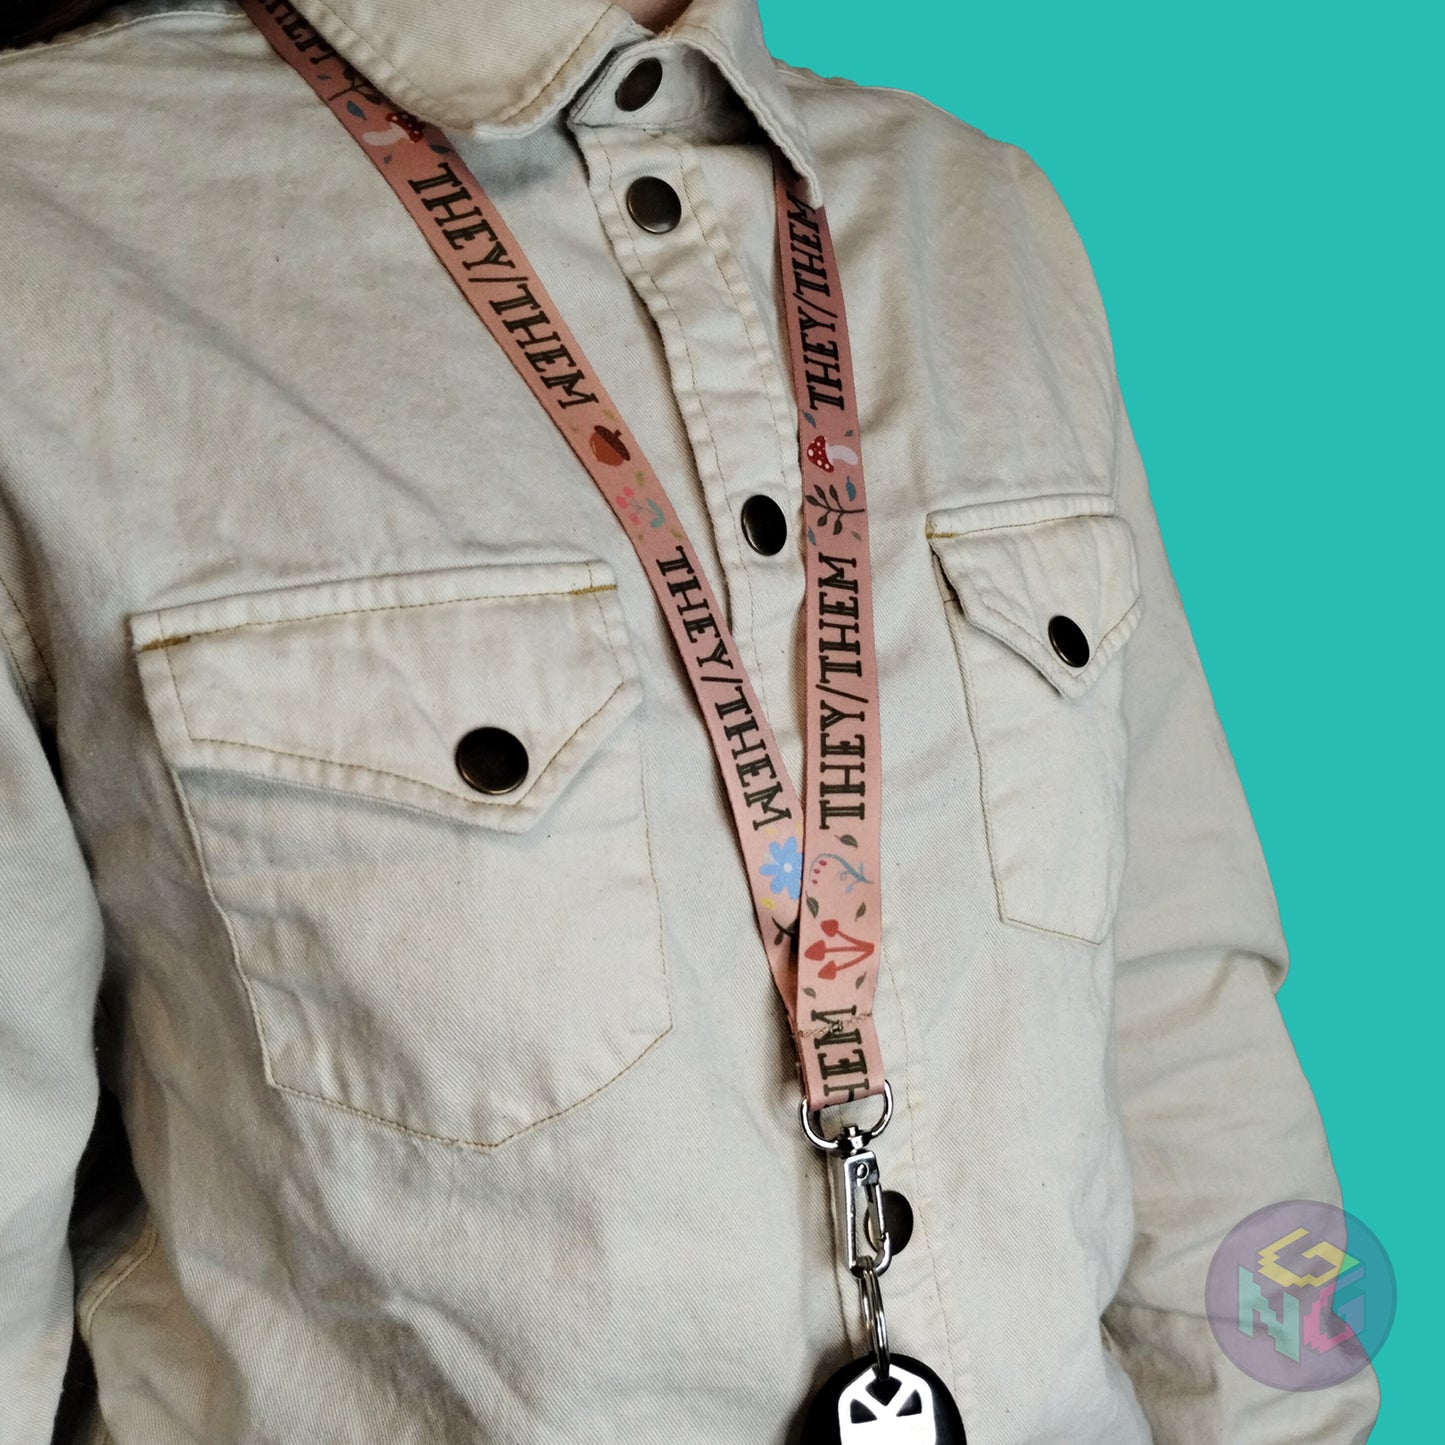 tan they them mushroom lanyard being worn by a flat chested person wearing a cream button up. The end of the lanyard falls between their sternum and bellybutton and has a key fob clipped to the end